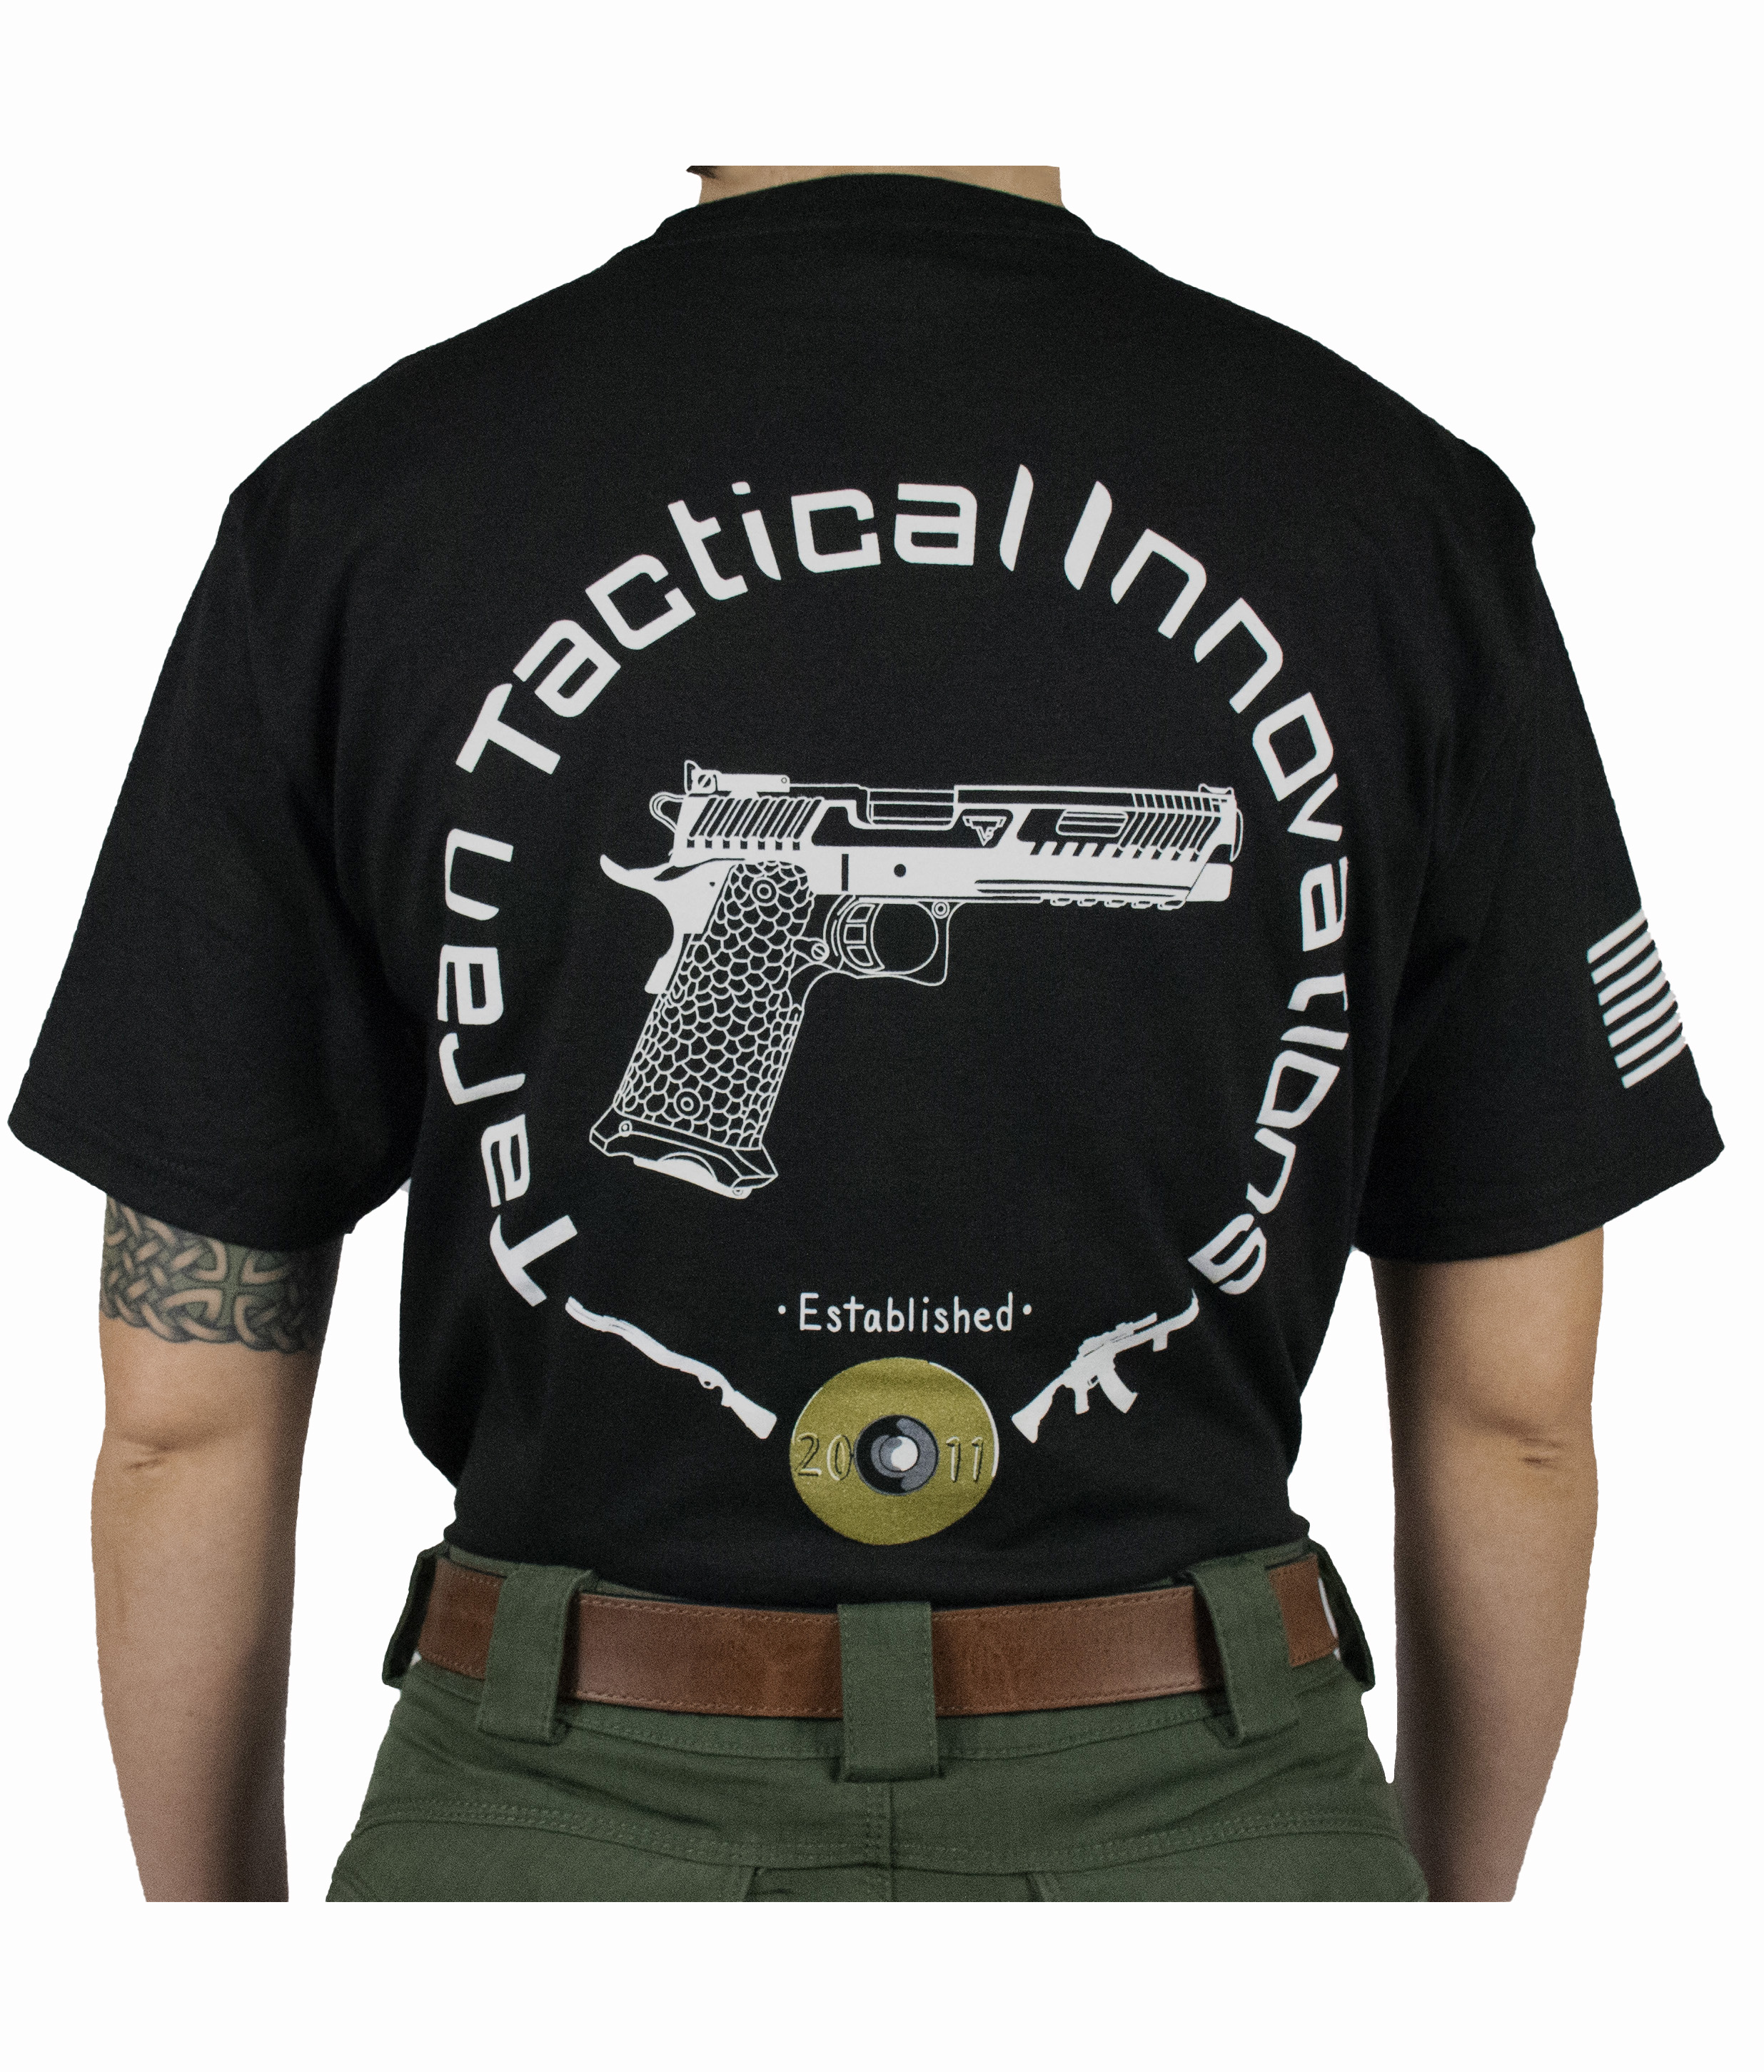 tamme TACTICAL SHIRTS 22aw - csihealth.net